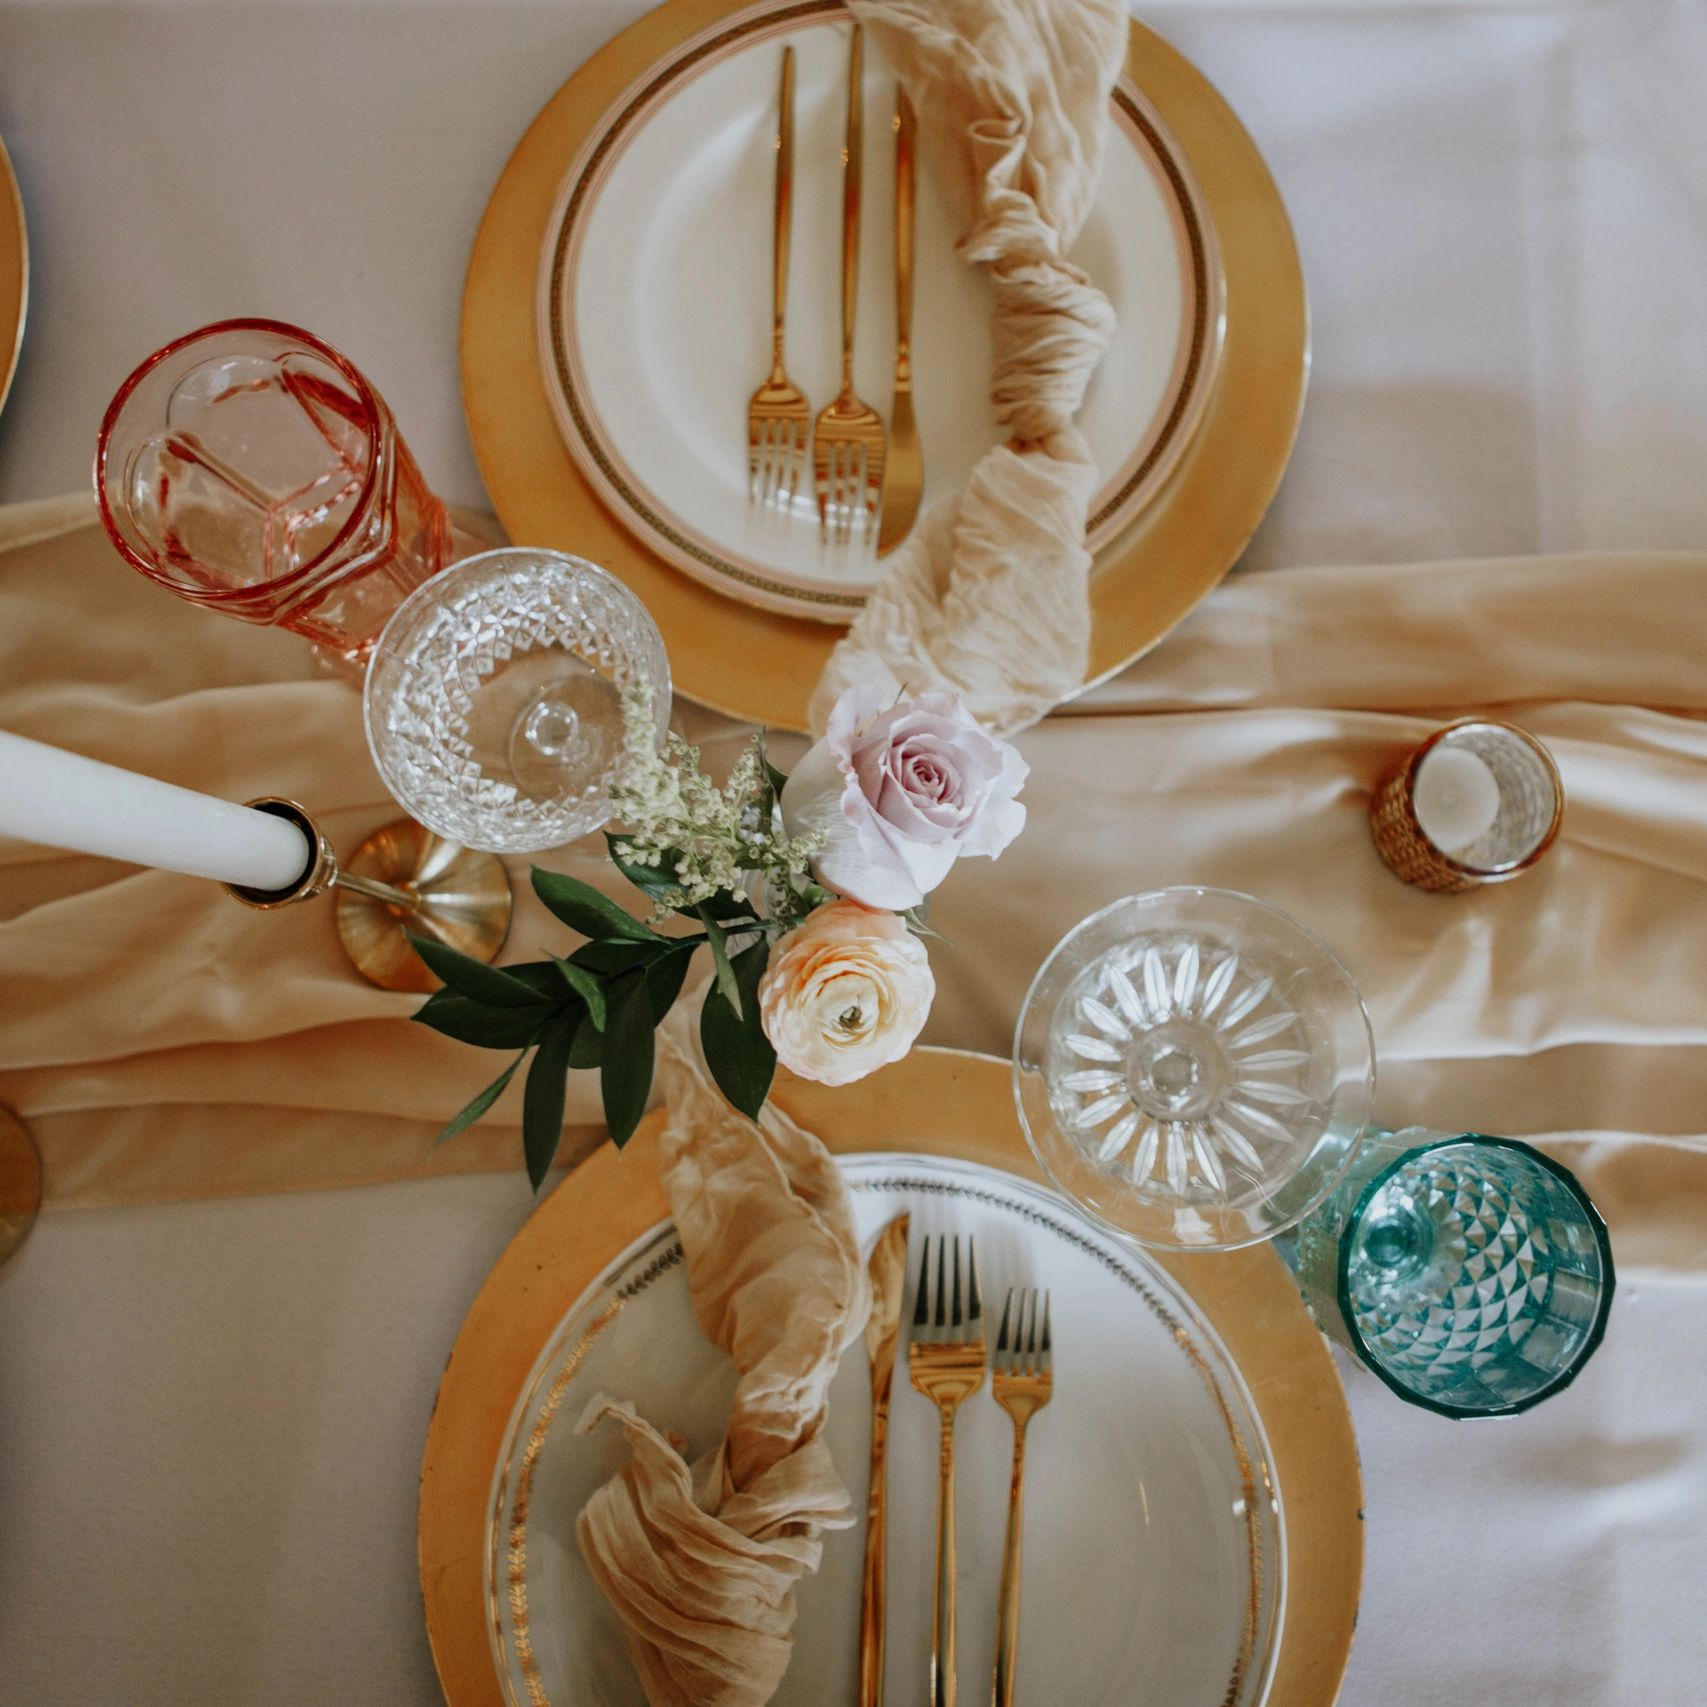 Place settings on a wedding guest table.
Photo copyright: Joelle Dardis Photography